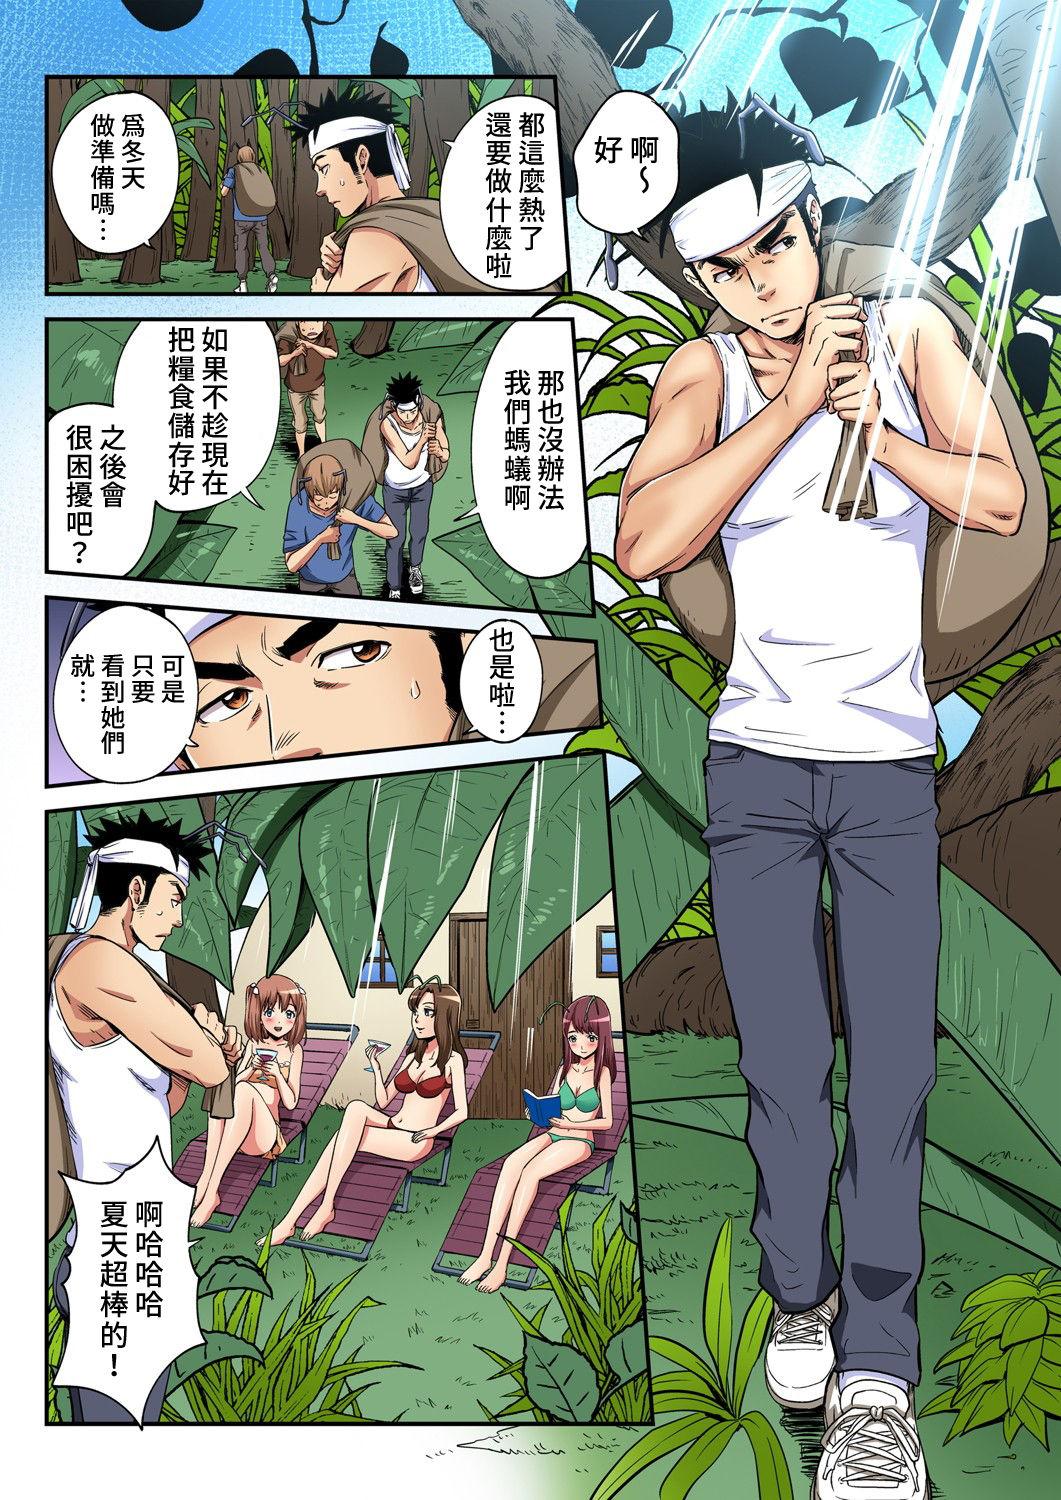 Gym [Pirontan] Otona no Douwa ~ The Grasshopper and the Ants | 大人的童話~螞蟻與蟋蟀 [Chinese] [禁漫漢化組] Officesex - Page 2